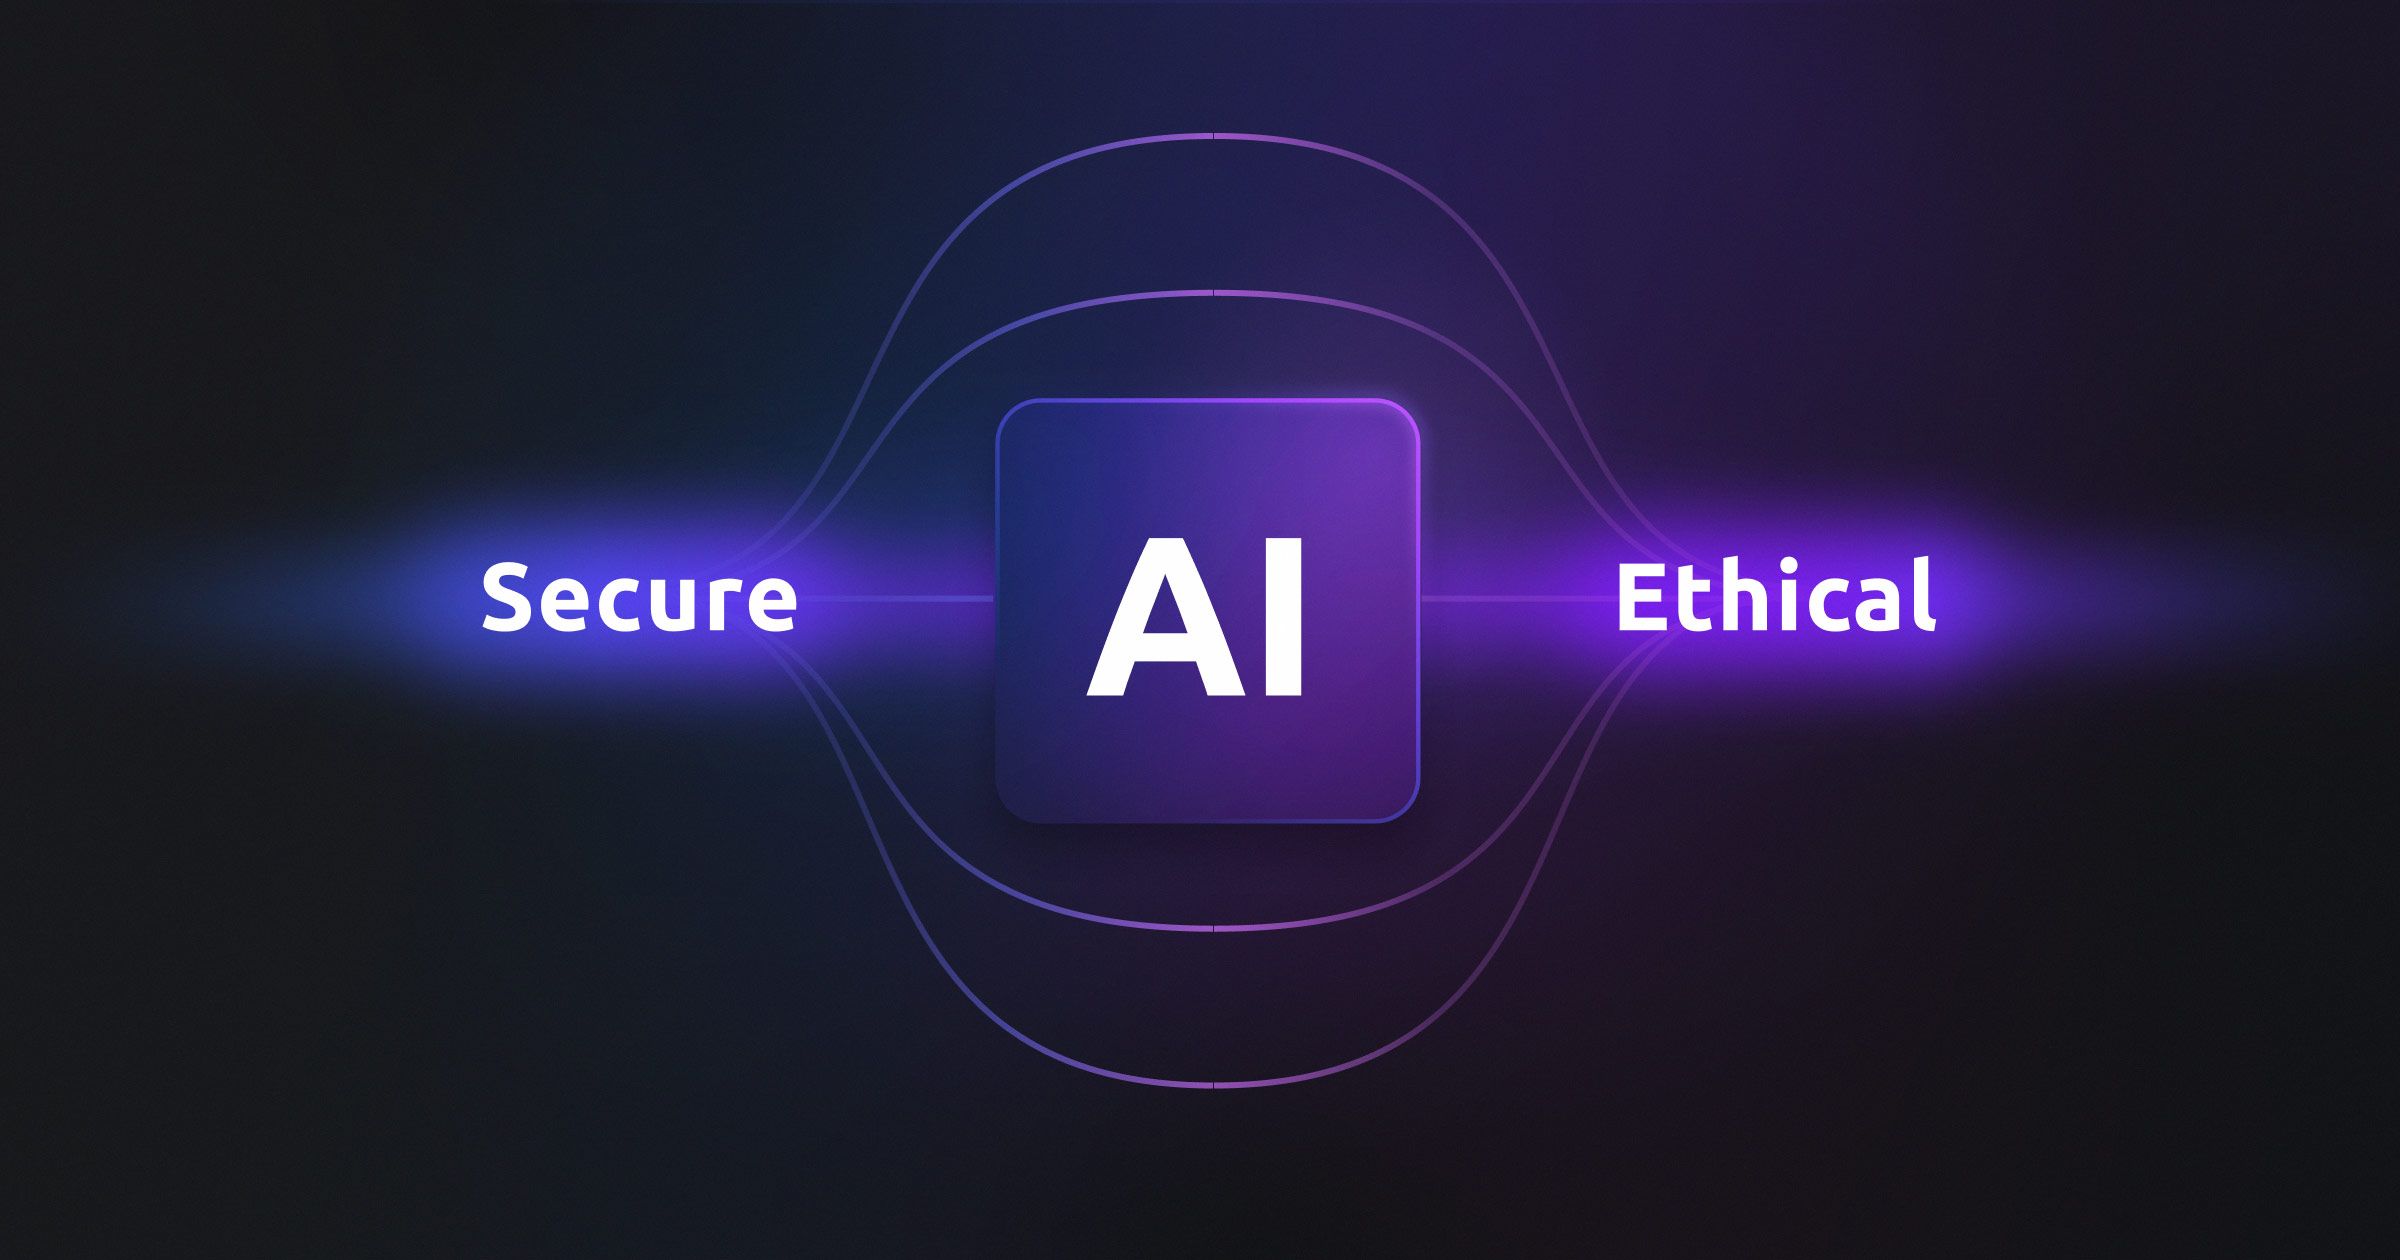 Building a Secure Foundation for Ethical AI Development